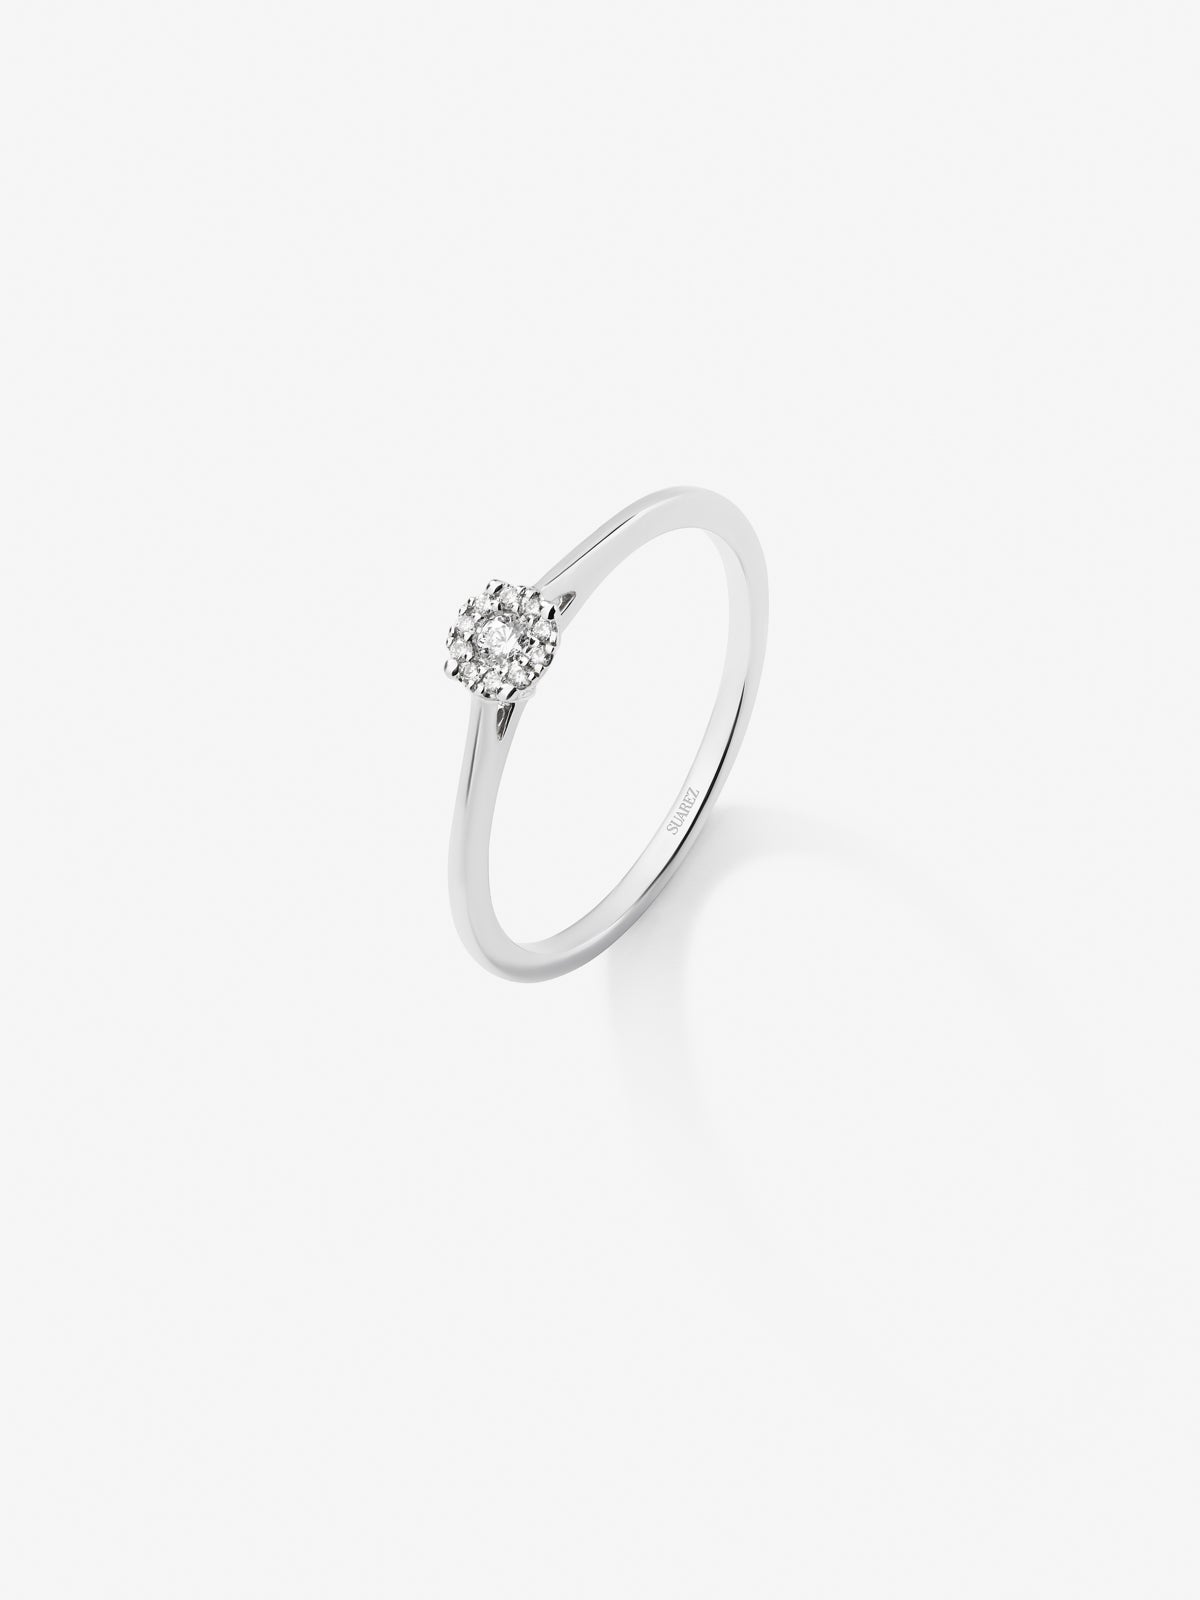 18K white gold ring with 11 brilliant-cut diamonds with a total of 0.06 cts